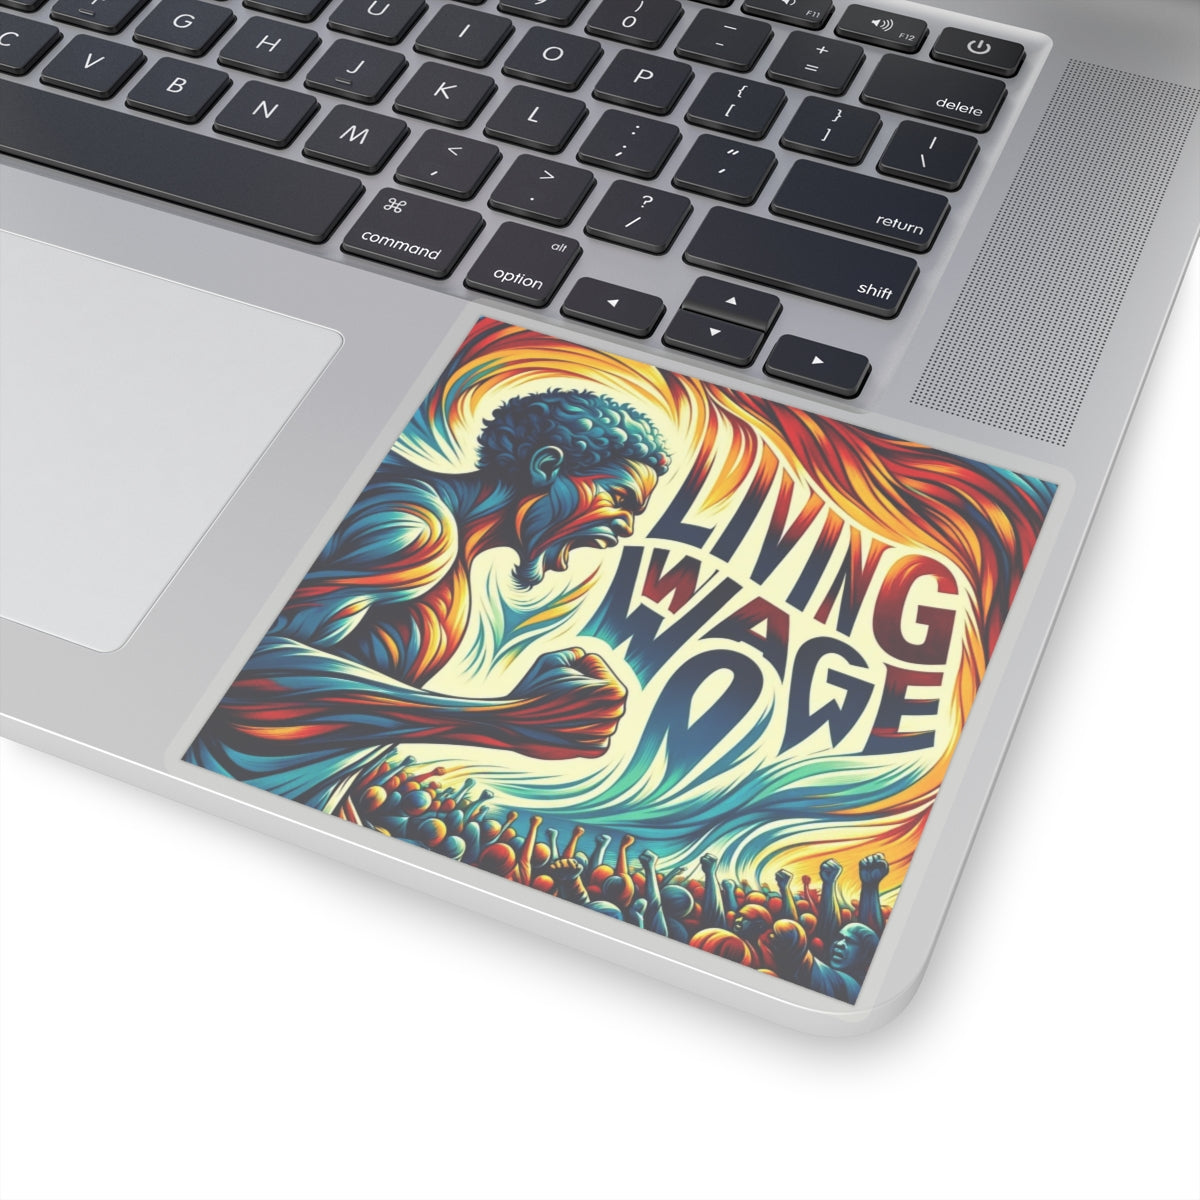 Bold Uncompromising Statement Sticker: Living Wage Now!